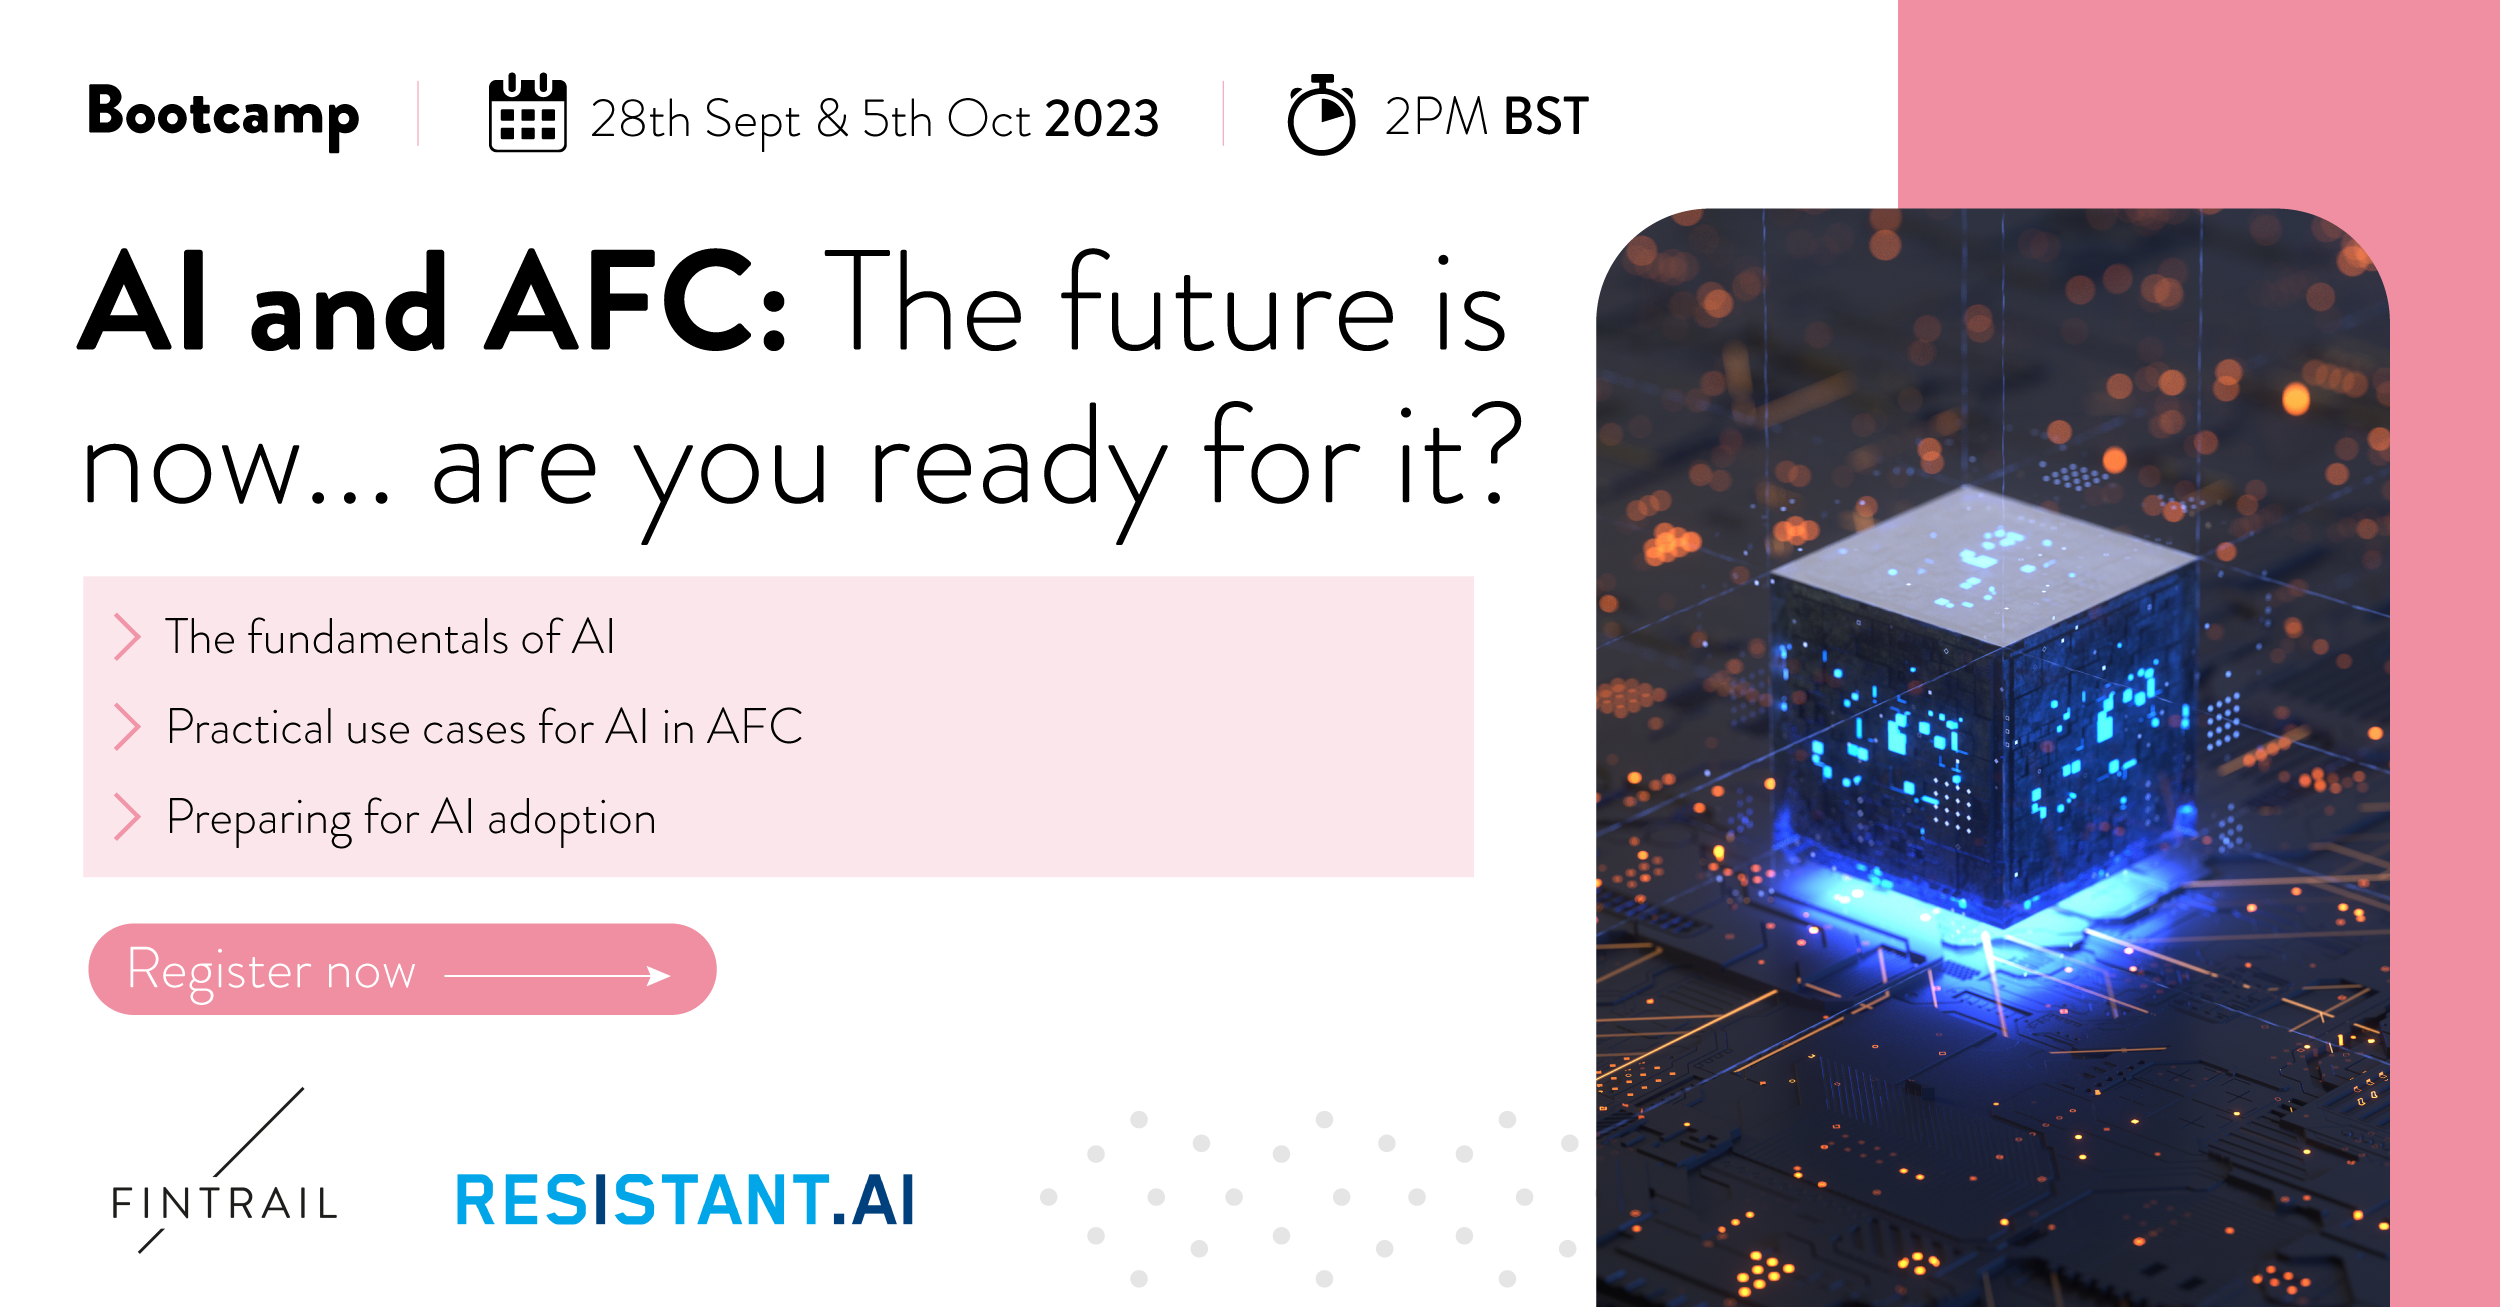 AI & AFC - The future is now